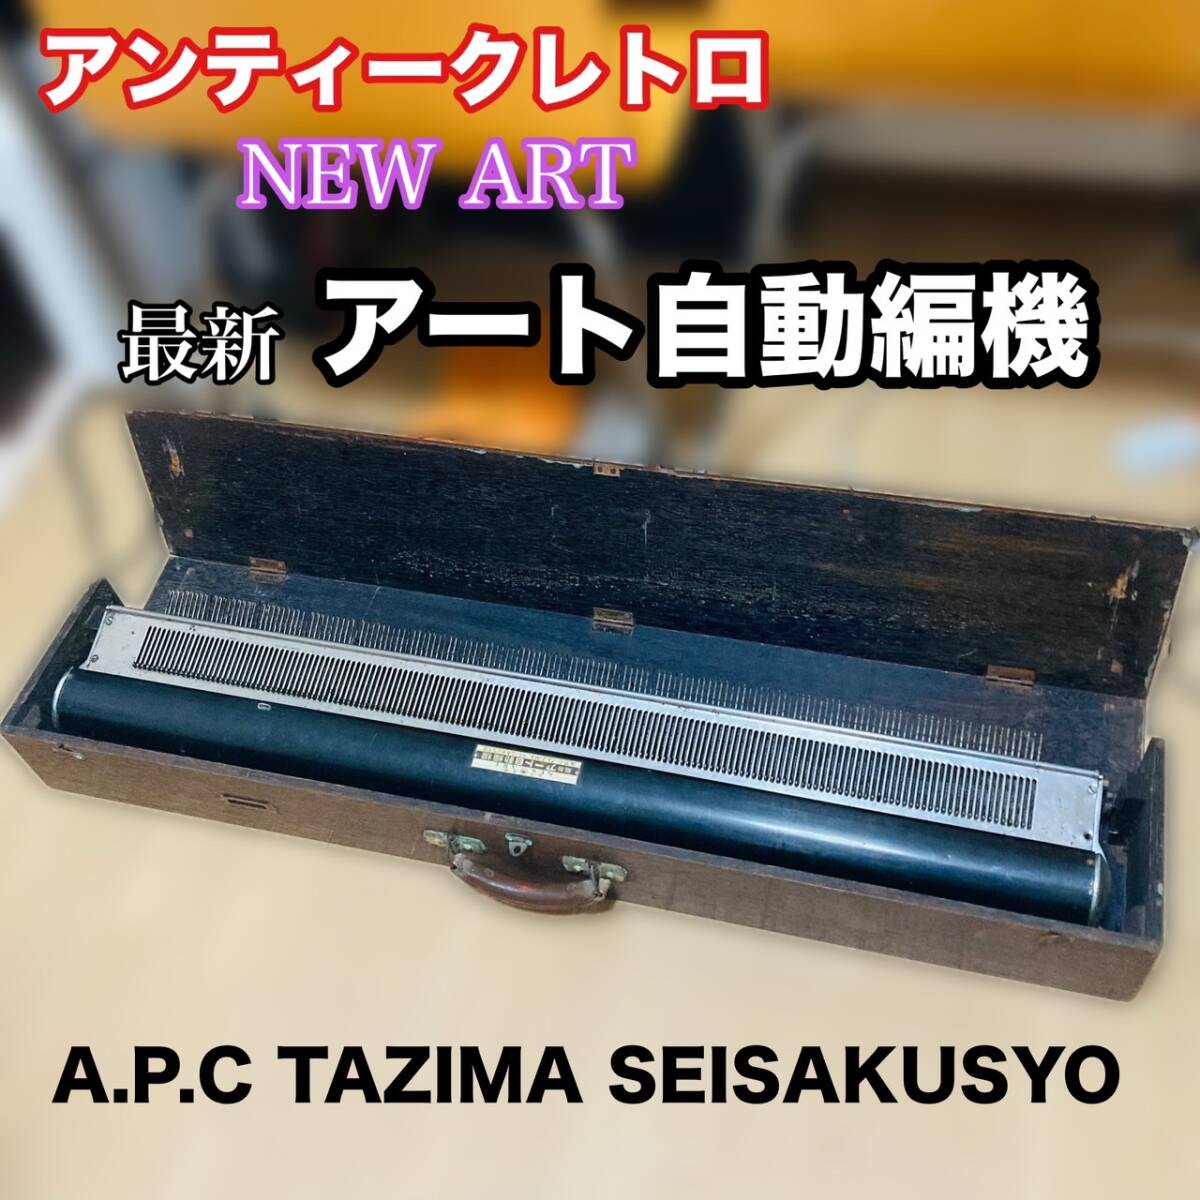 NEW ART newest art automatic compilation machine A.P.C. TAZIMA SEISAKUSYO details unknown present condition goods junk treatment /Y034-08